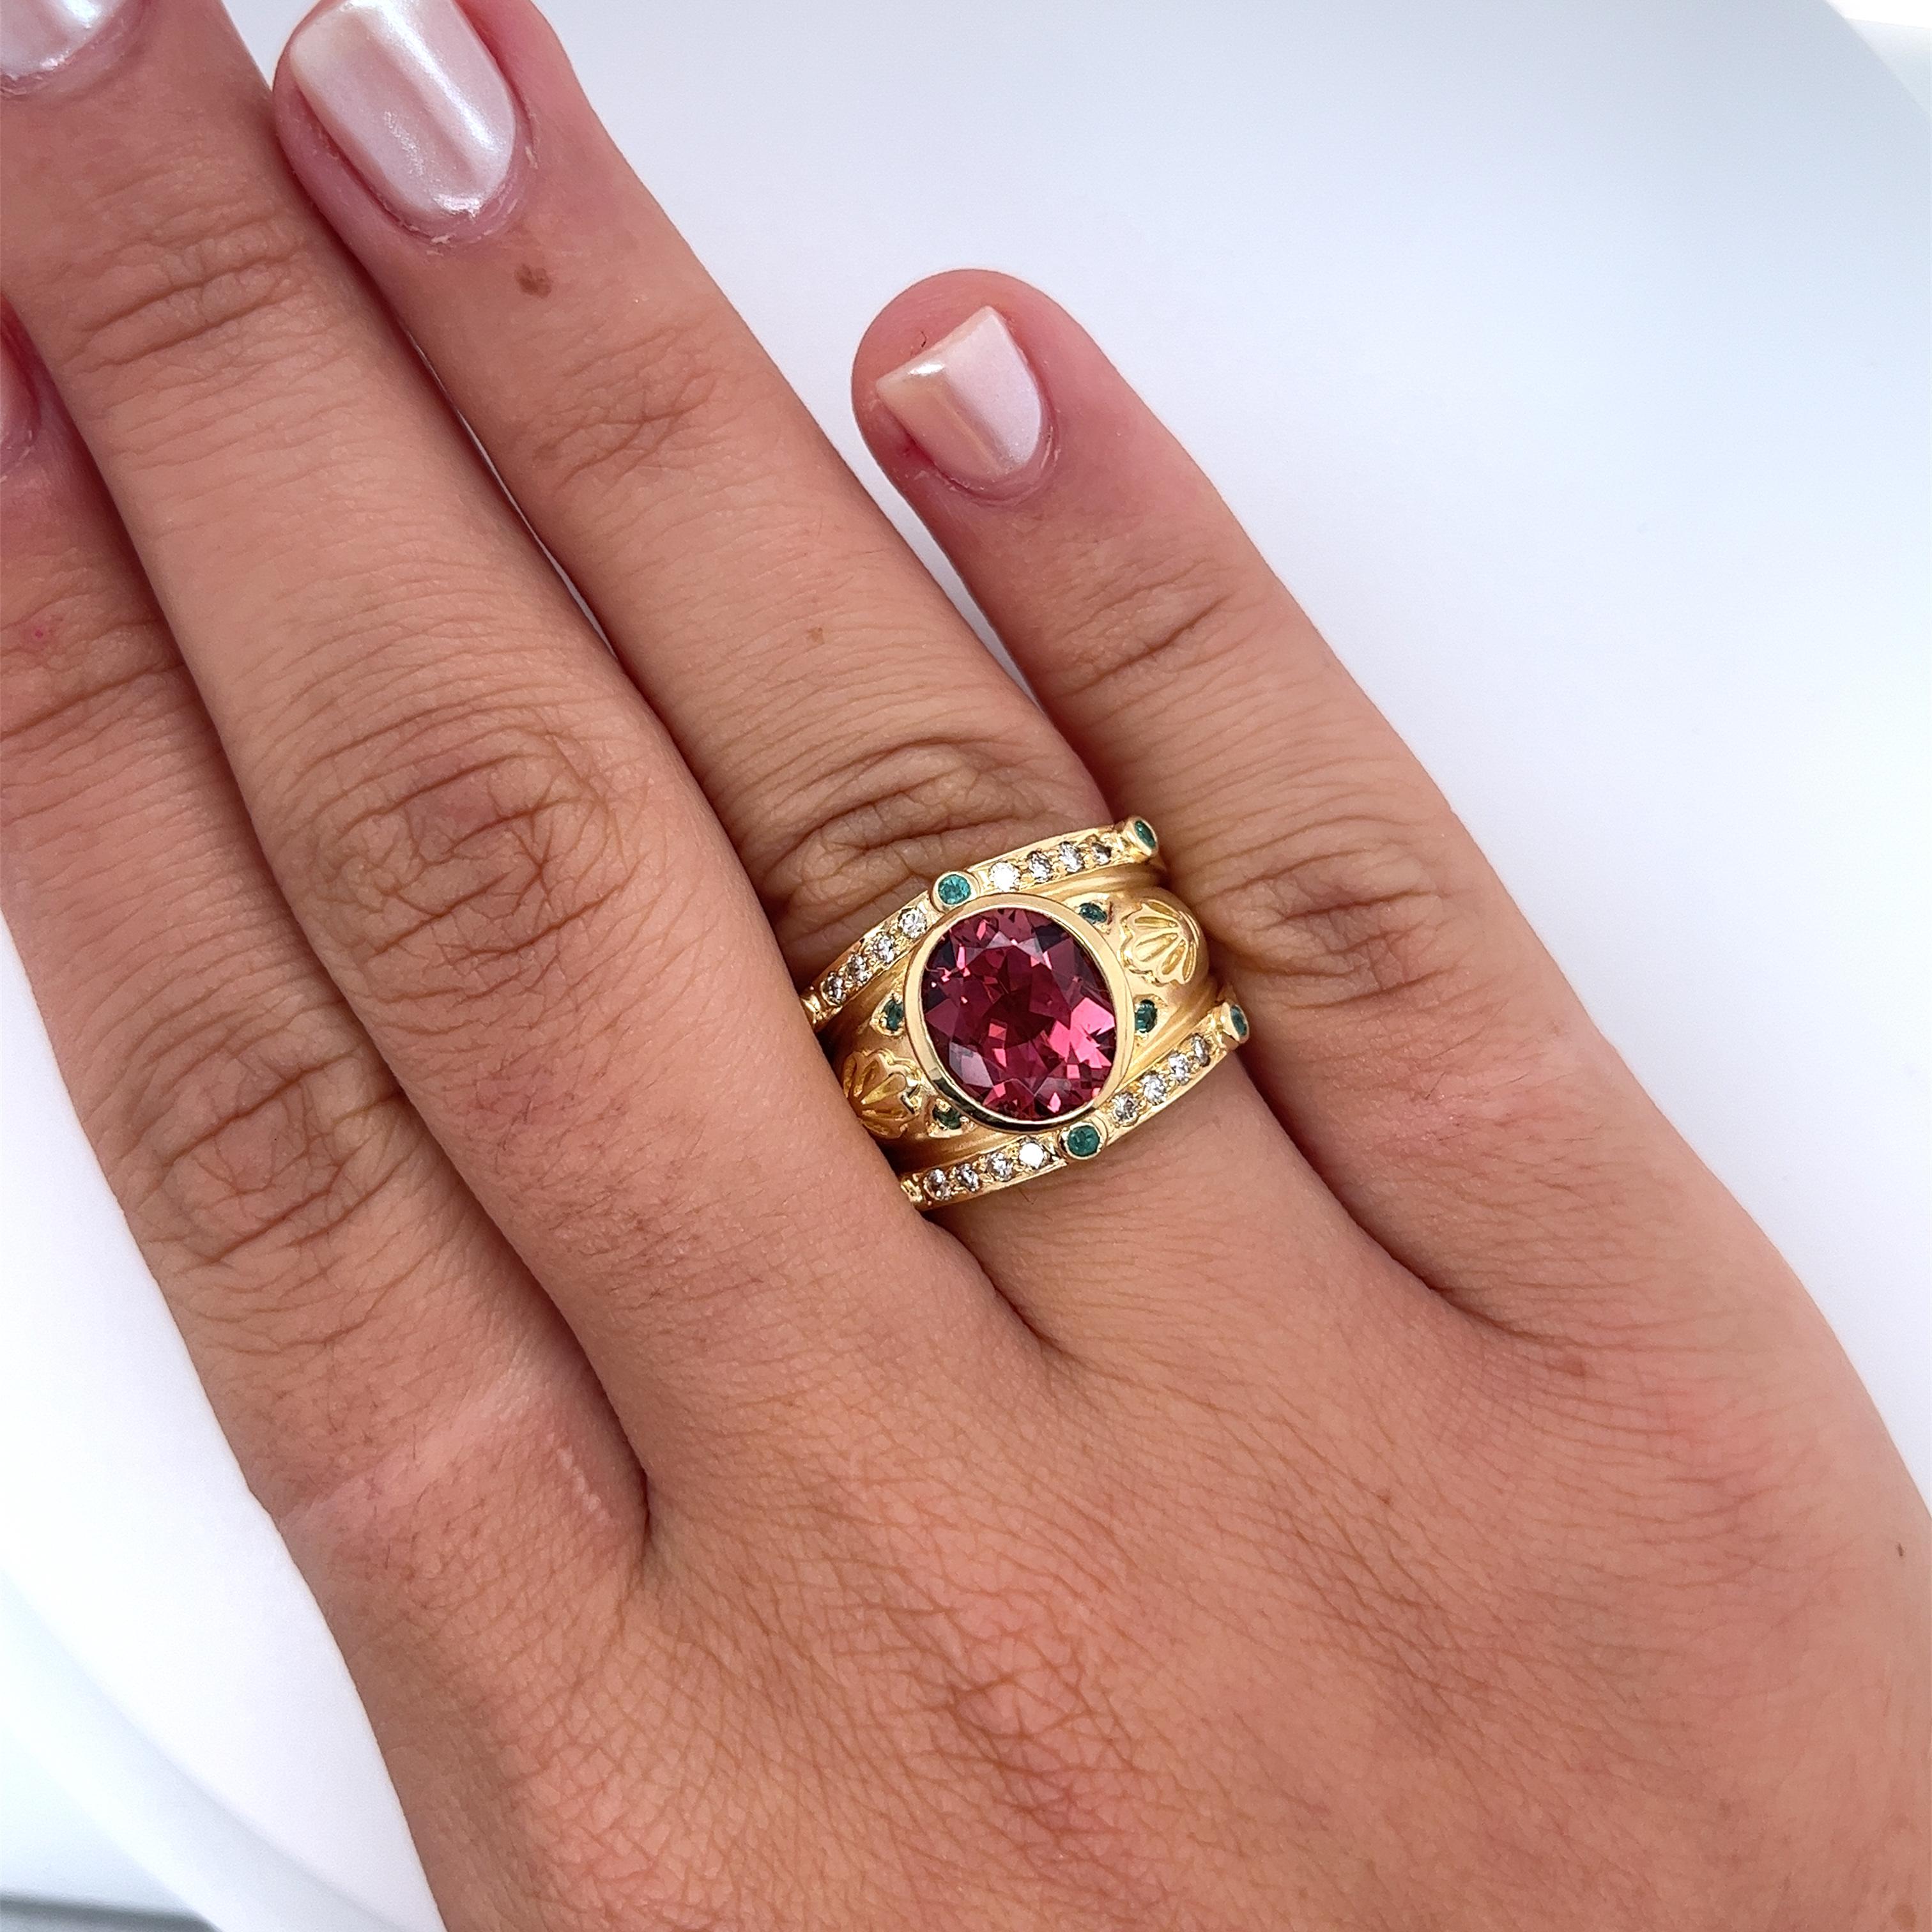 Vintage 6CTTW Oval Cut Pinkish-Red Tourmaline Ring featuring stunning Neon Paraiba Tourmaline and Diamond Side Stones. Crafted in 18K Yellow Gold and weighs 15.5 grams.

This semi-precious ring from a bygone era is characterized by the bezel set